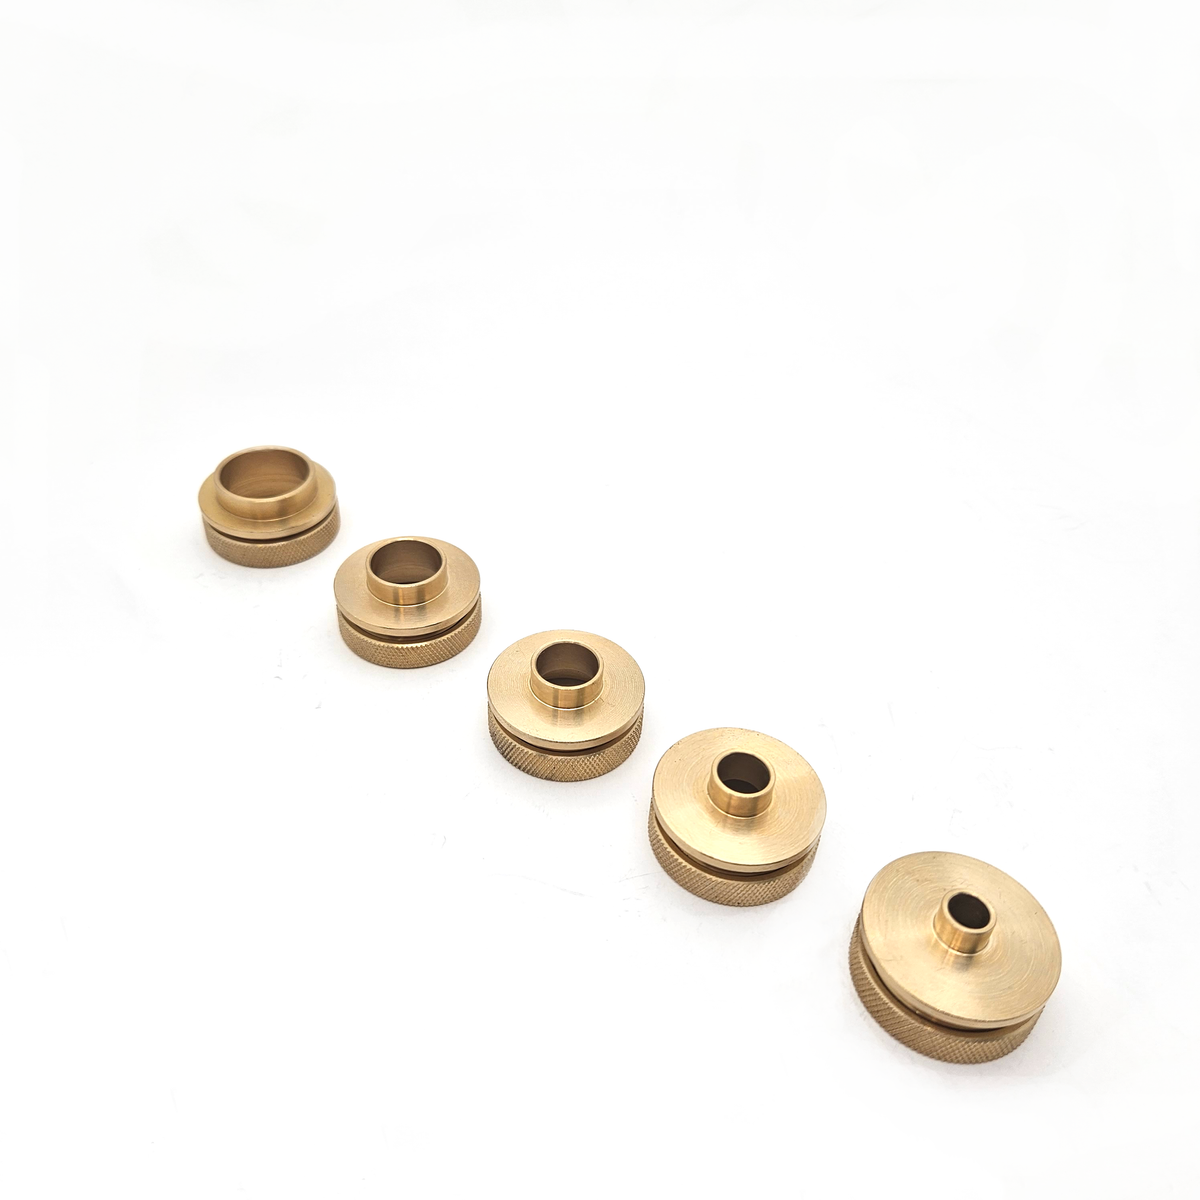 DCT Brass Router Template Guides Bushing & Lock Nuts 10-Piece Guide  Bushings Set